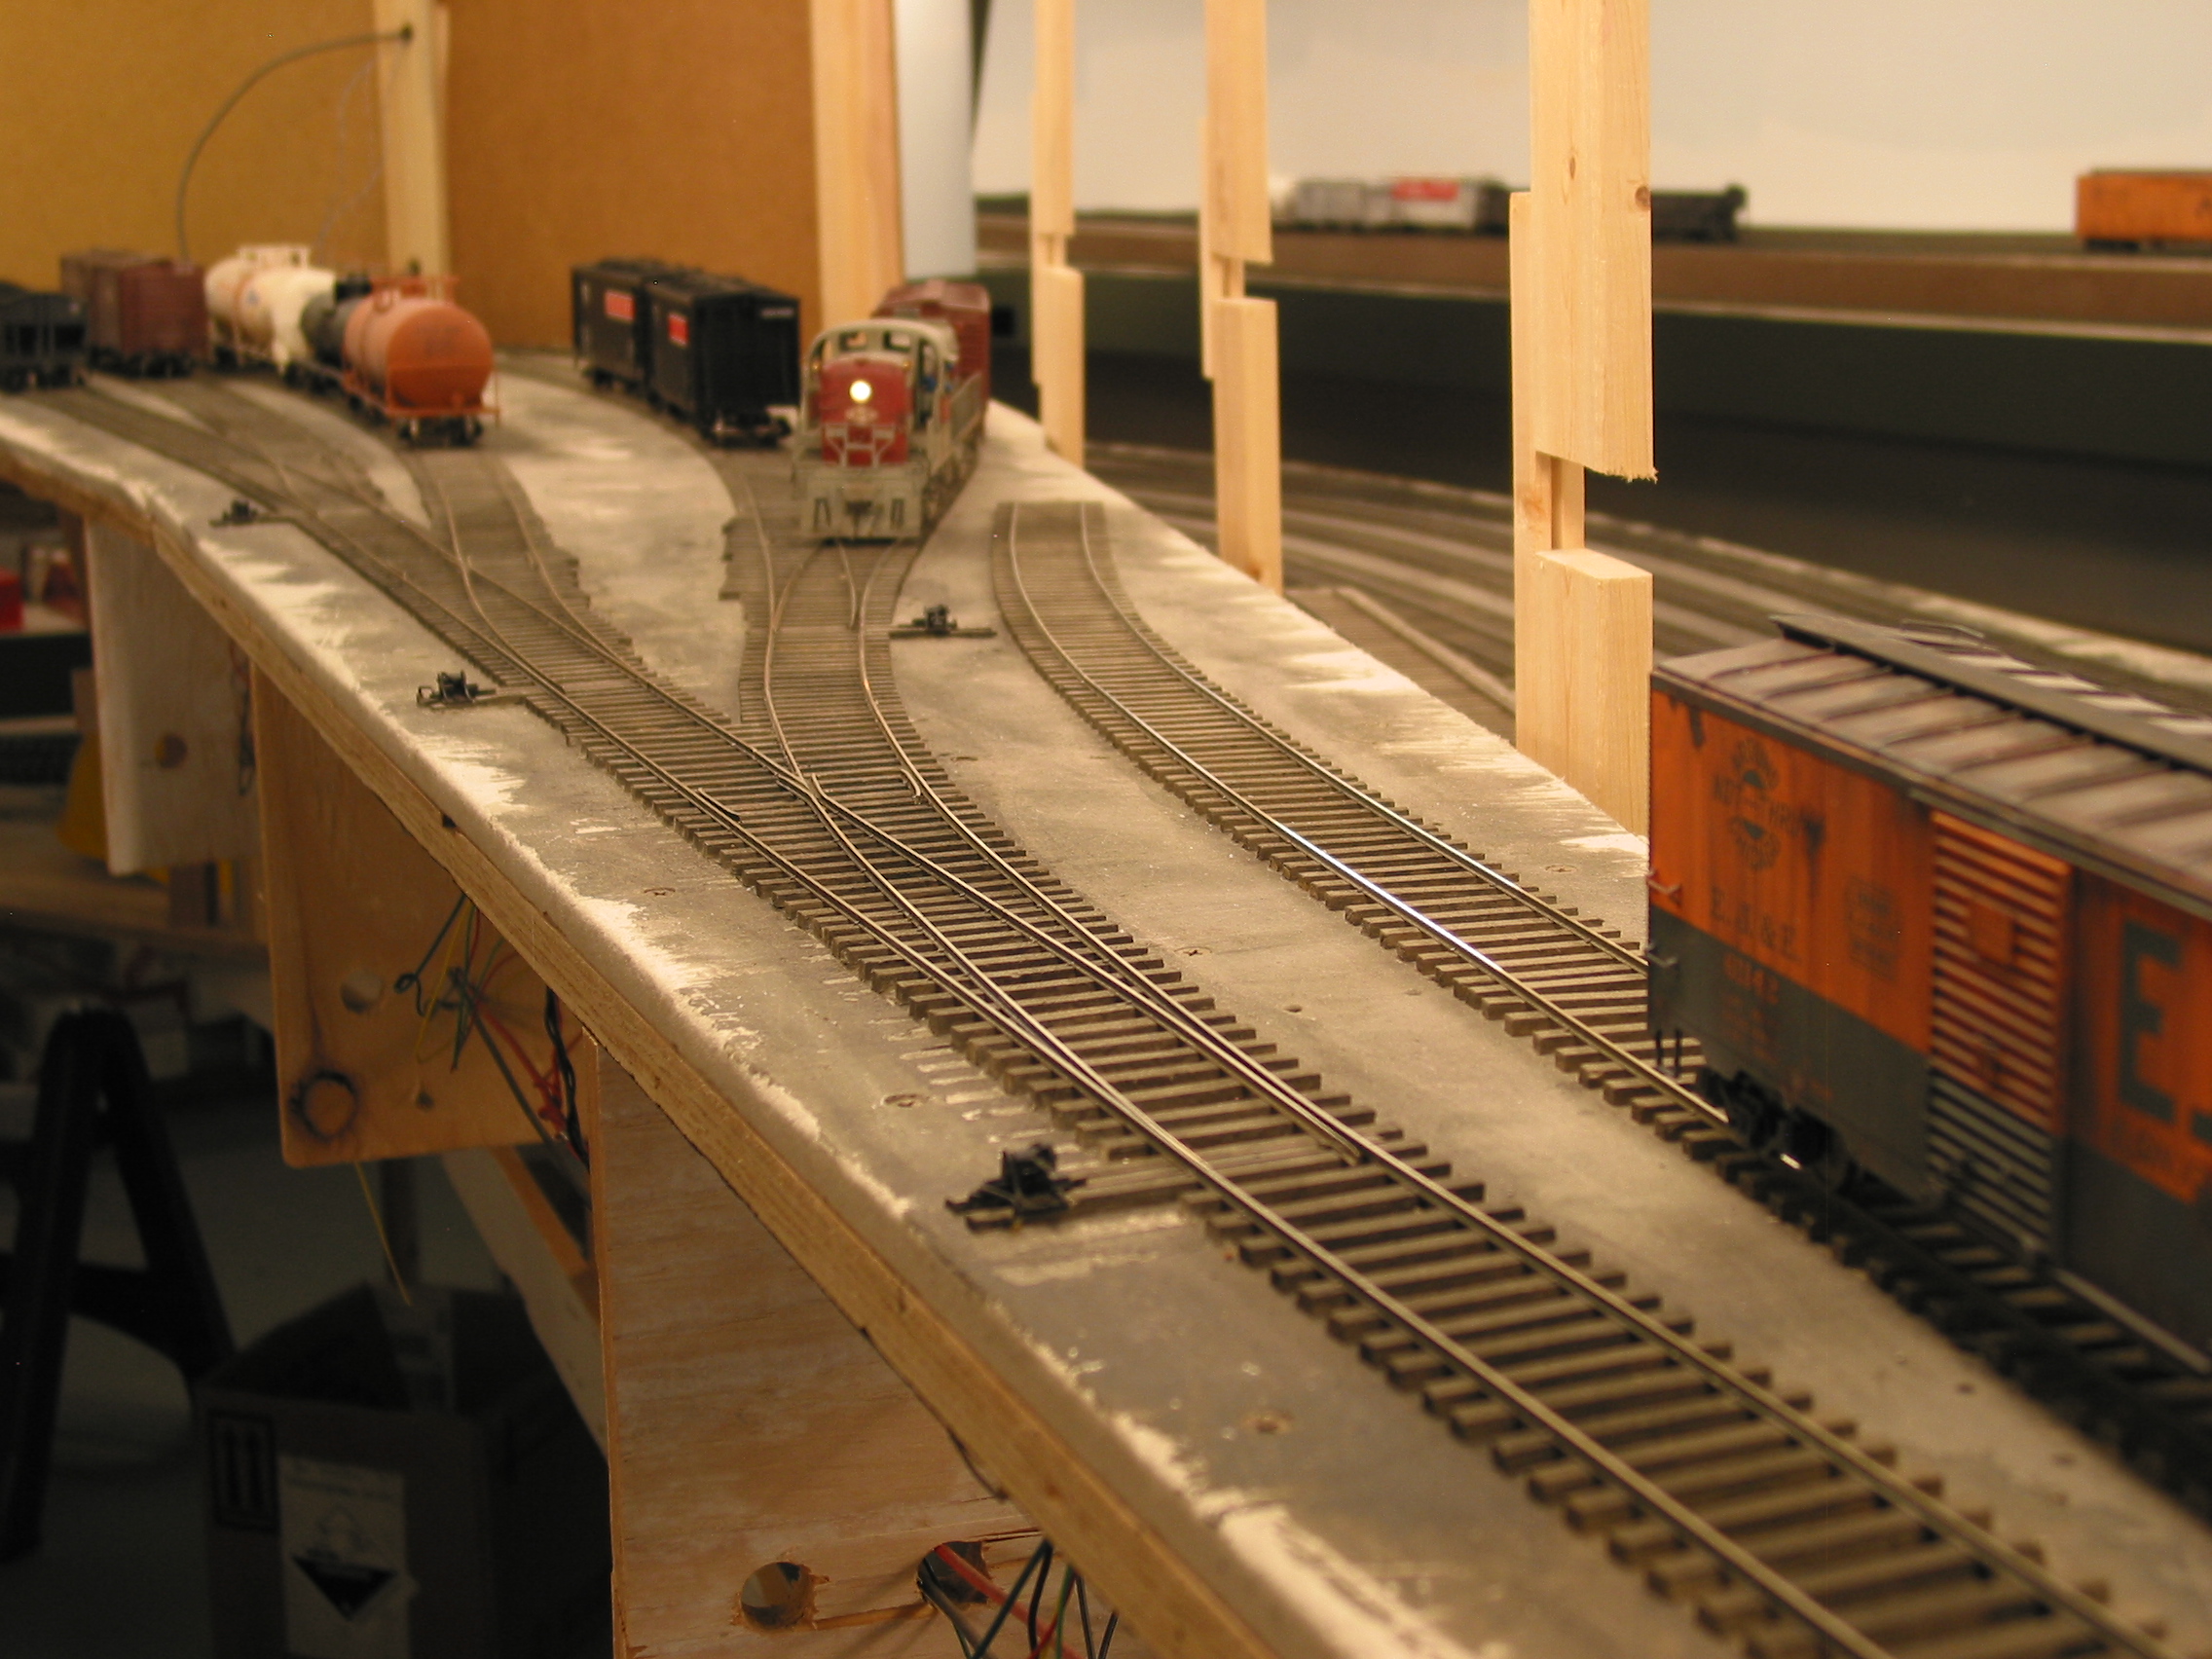  Because of the closeness of the track to the aisle, ground throws (HO) are used in Fillmore Heights. A bell crank wire actuates a micro switch underside to change polarity of the frog. The EJ&amp;E box is on the loading dock track for Firestone. 